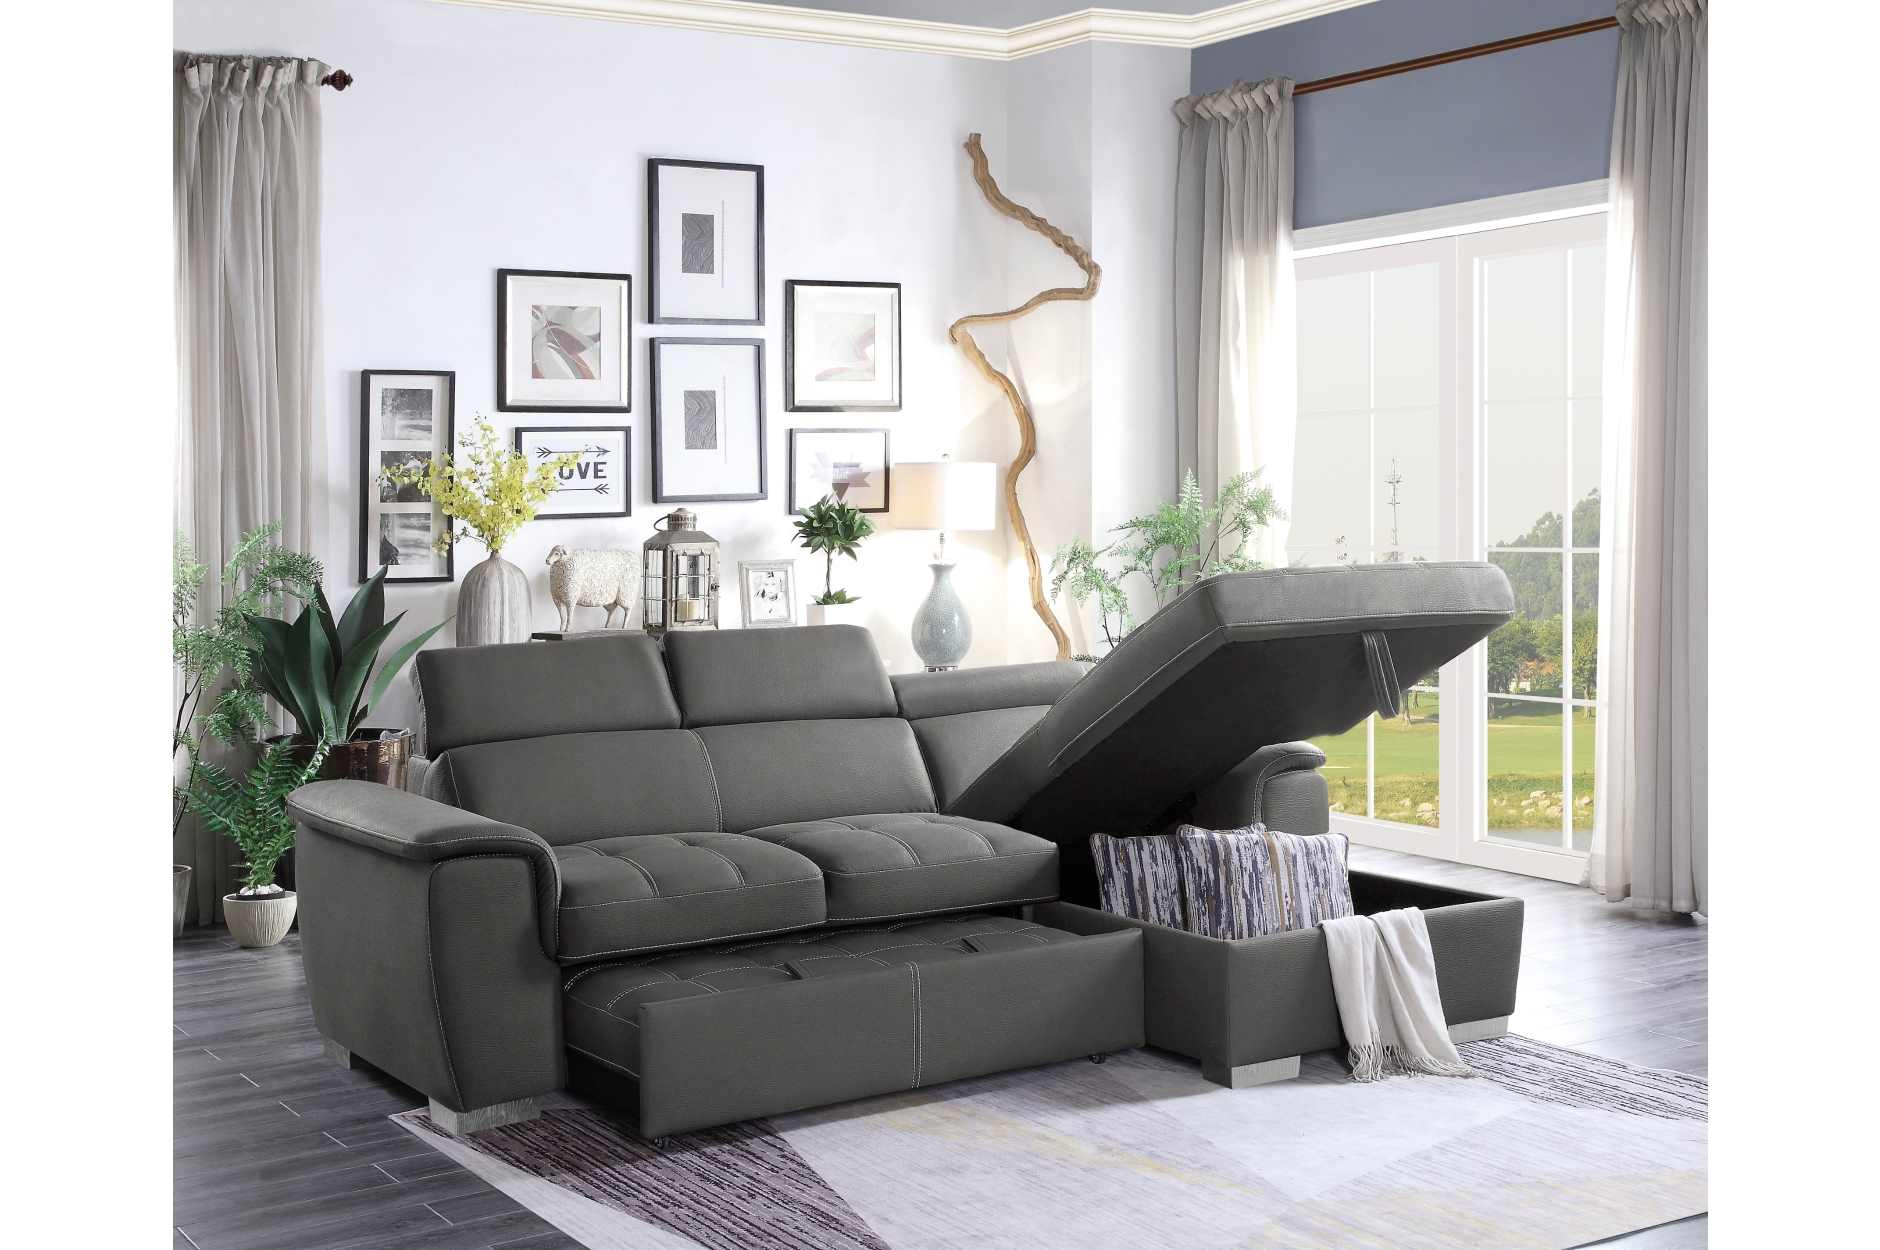 Ferriday Grey Fabric Sectional Sofa Bed with Right Storage Chaise 8228